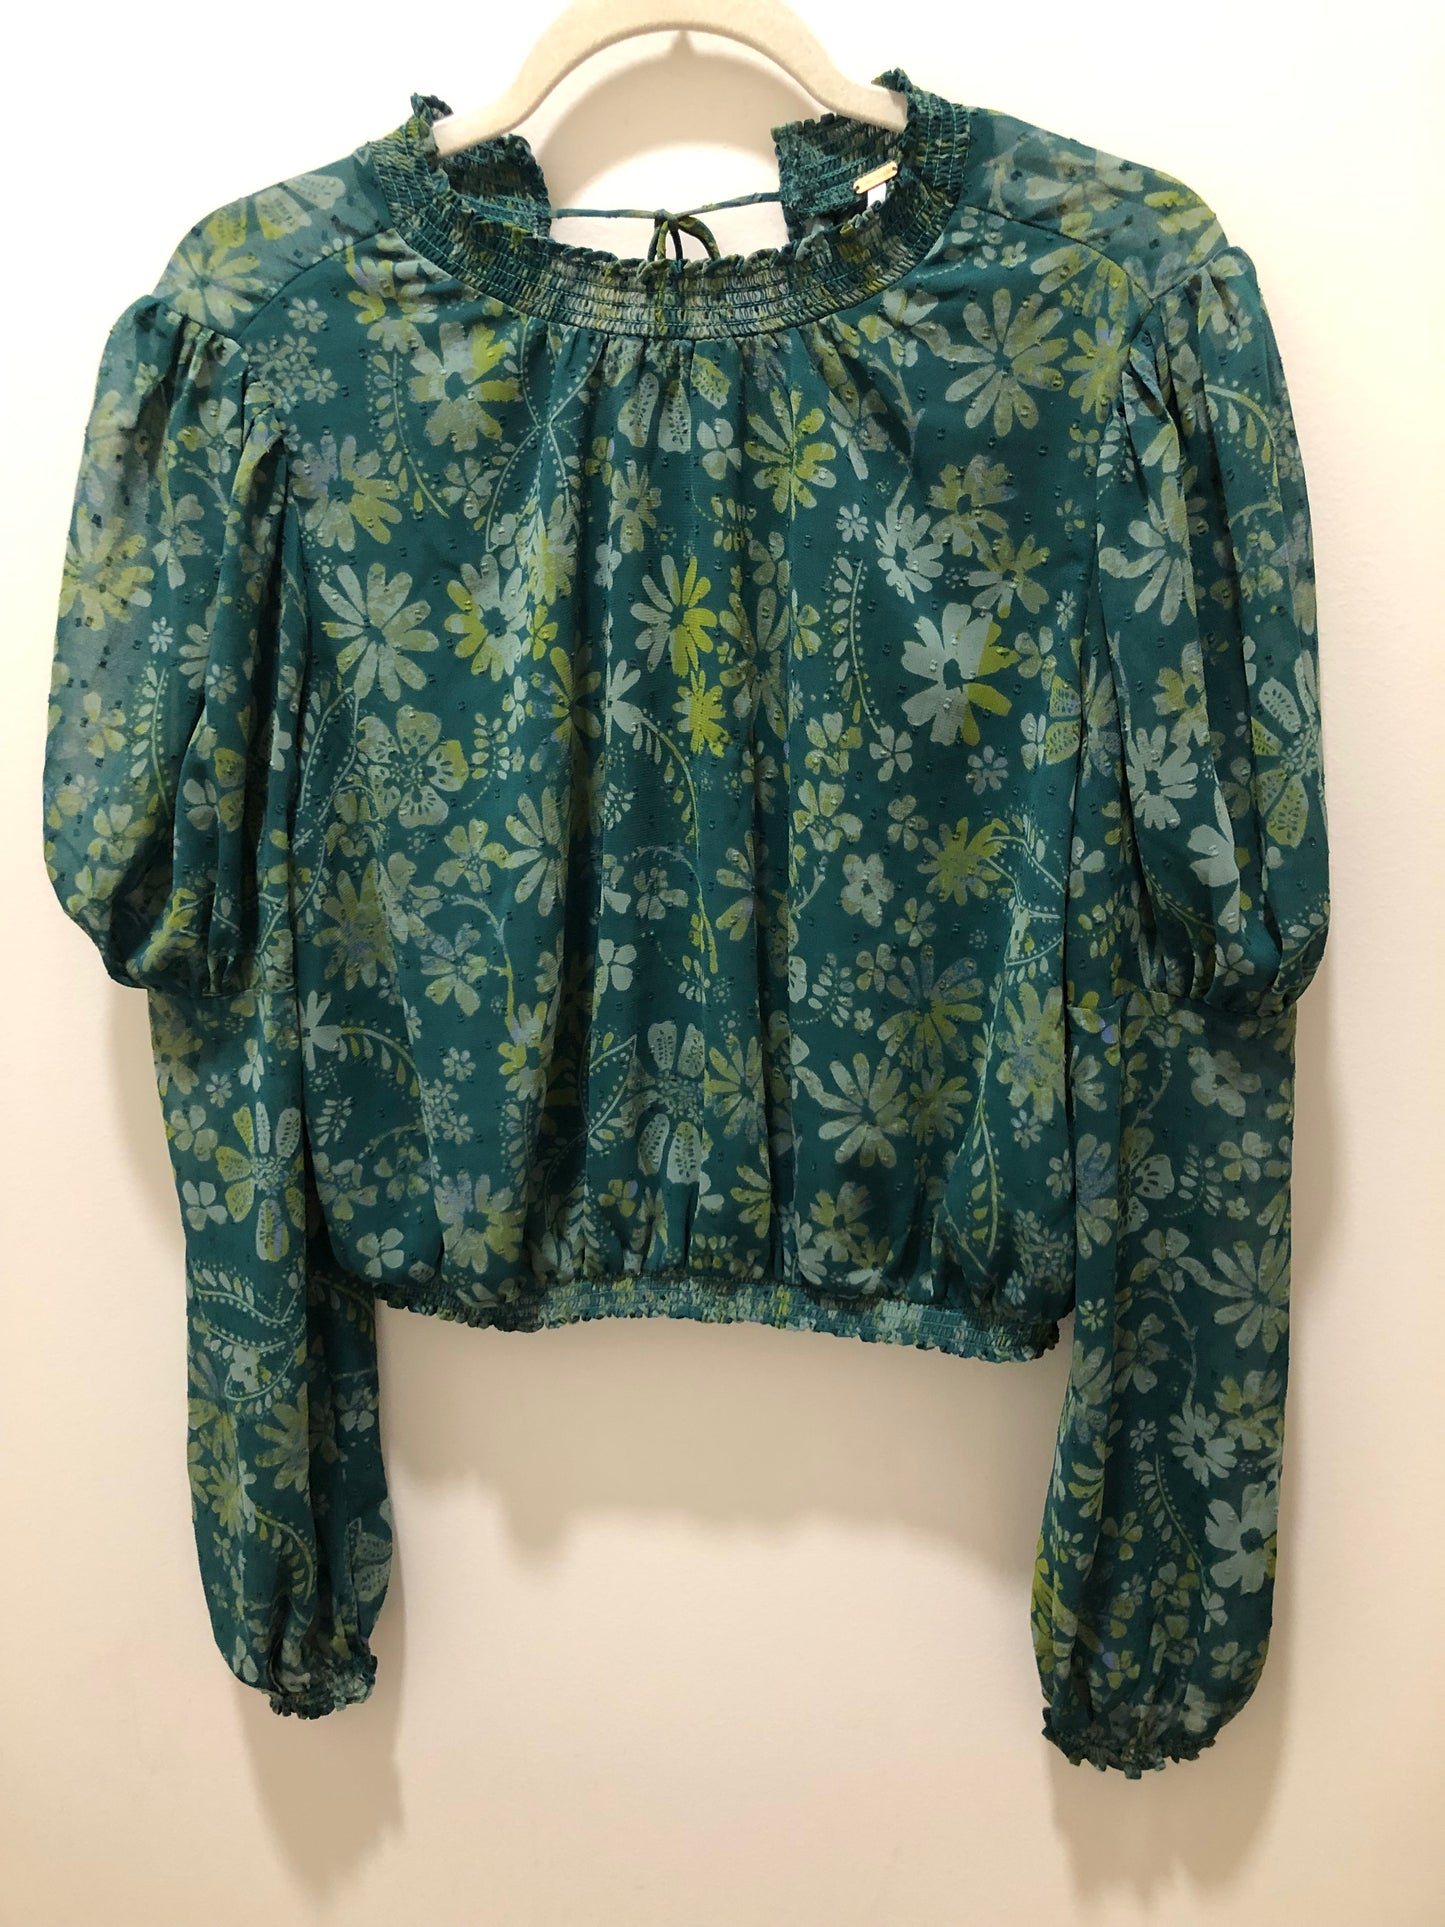 Free People Adult Size xs Green Floral Shirt